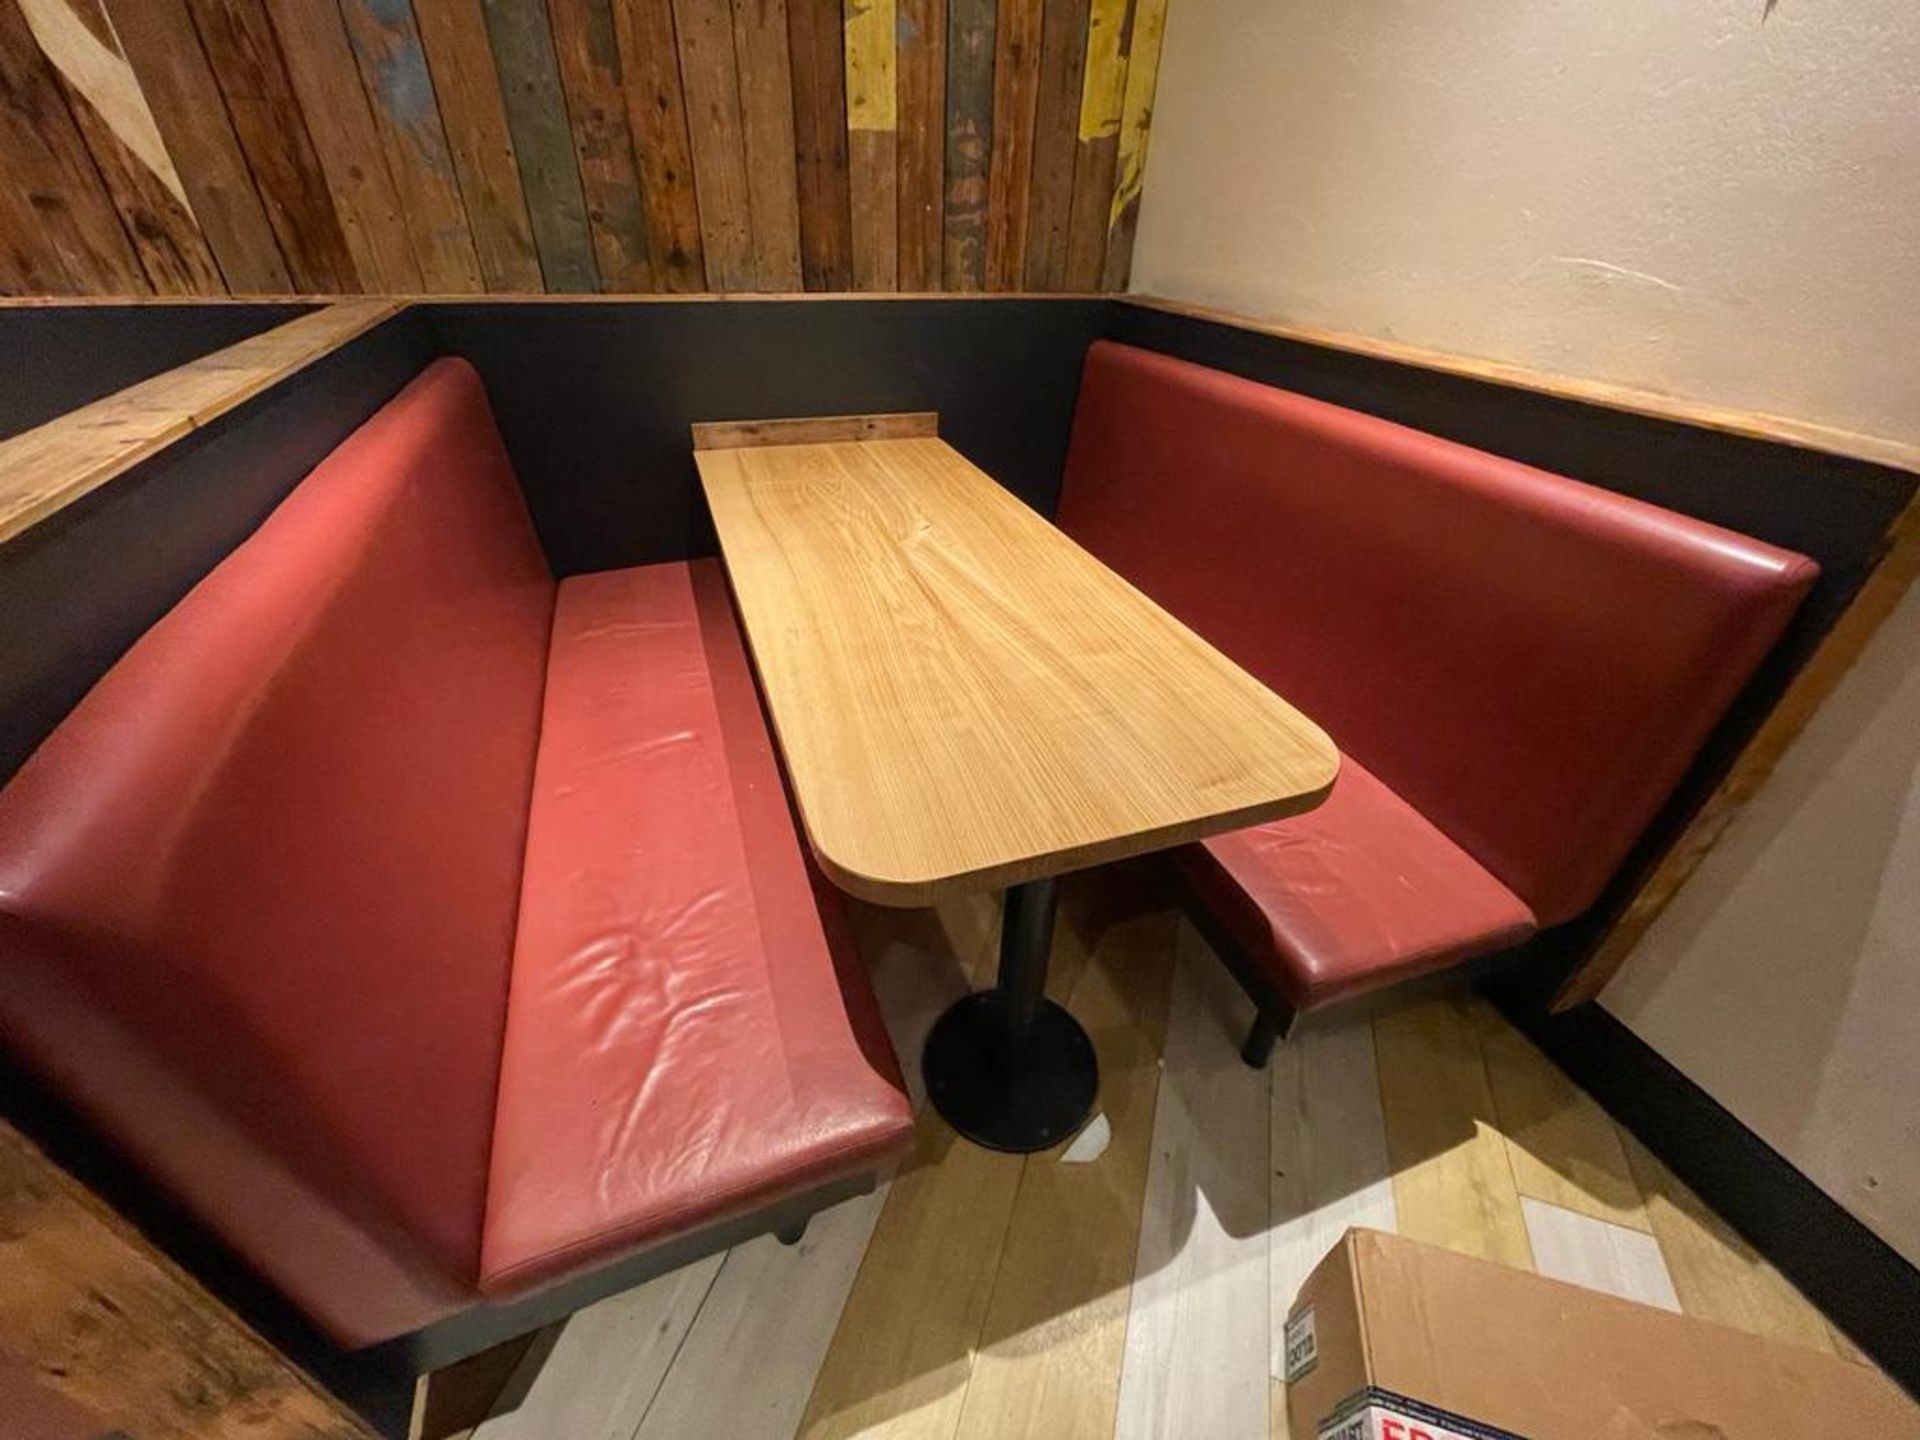 5 x Restaurant Leather Seating Booths With Oak Tables - Includes 10 x Seating Benches Upholstered in - Image 10 of 11